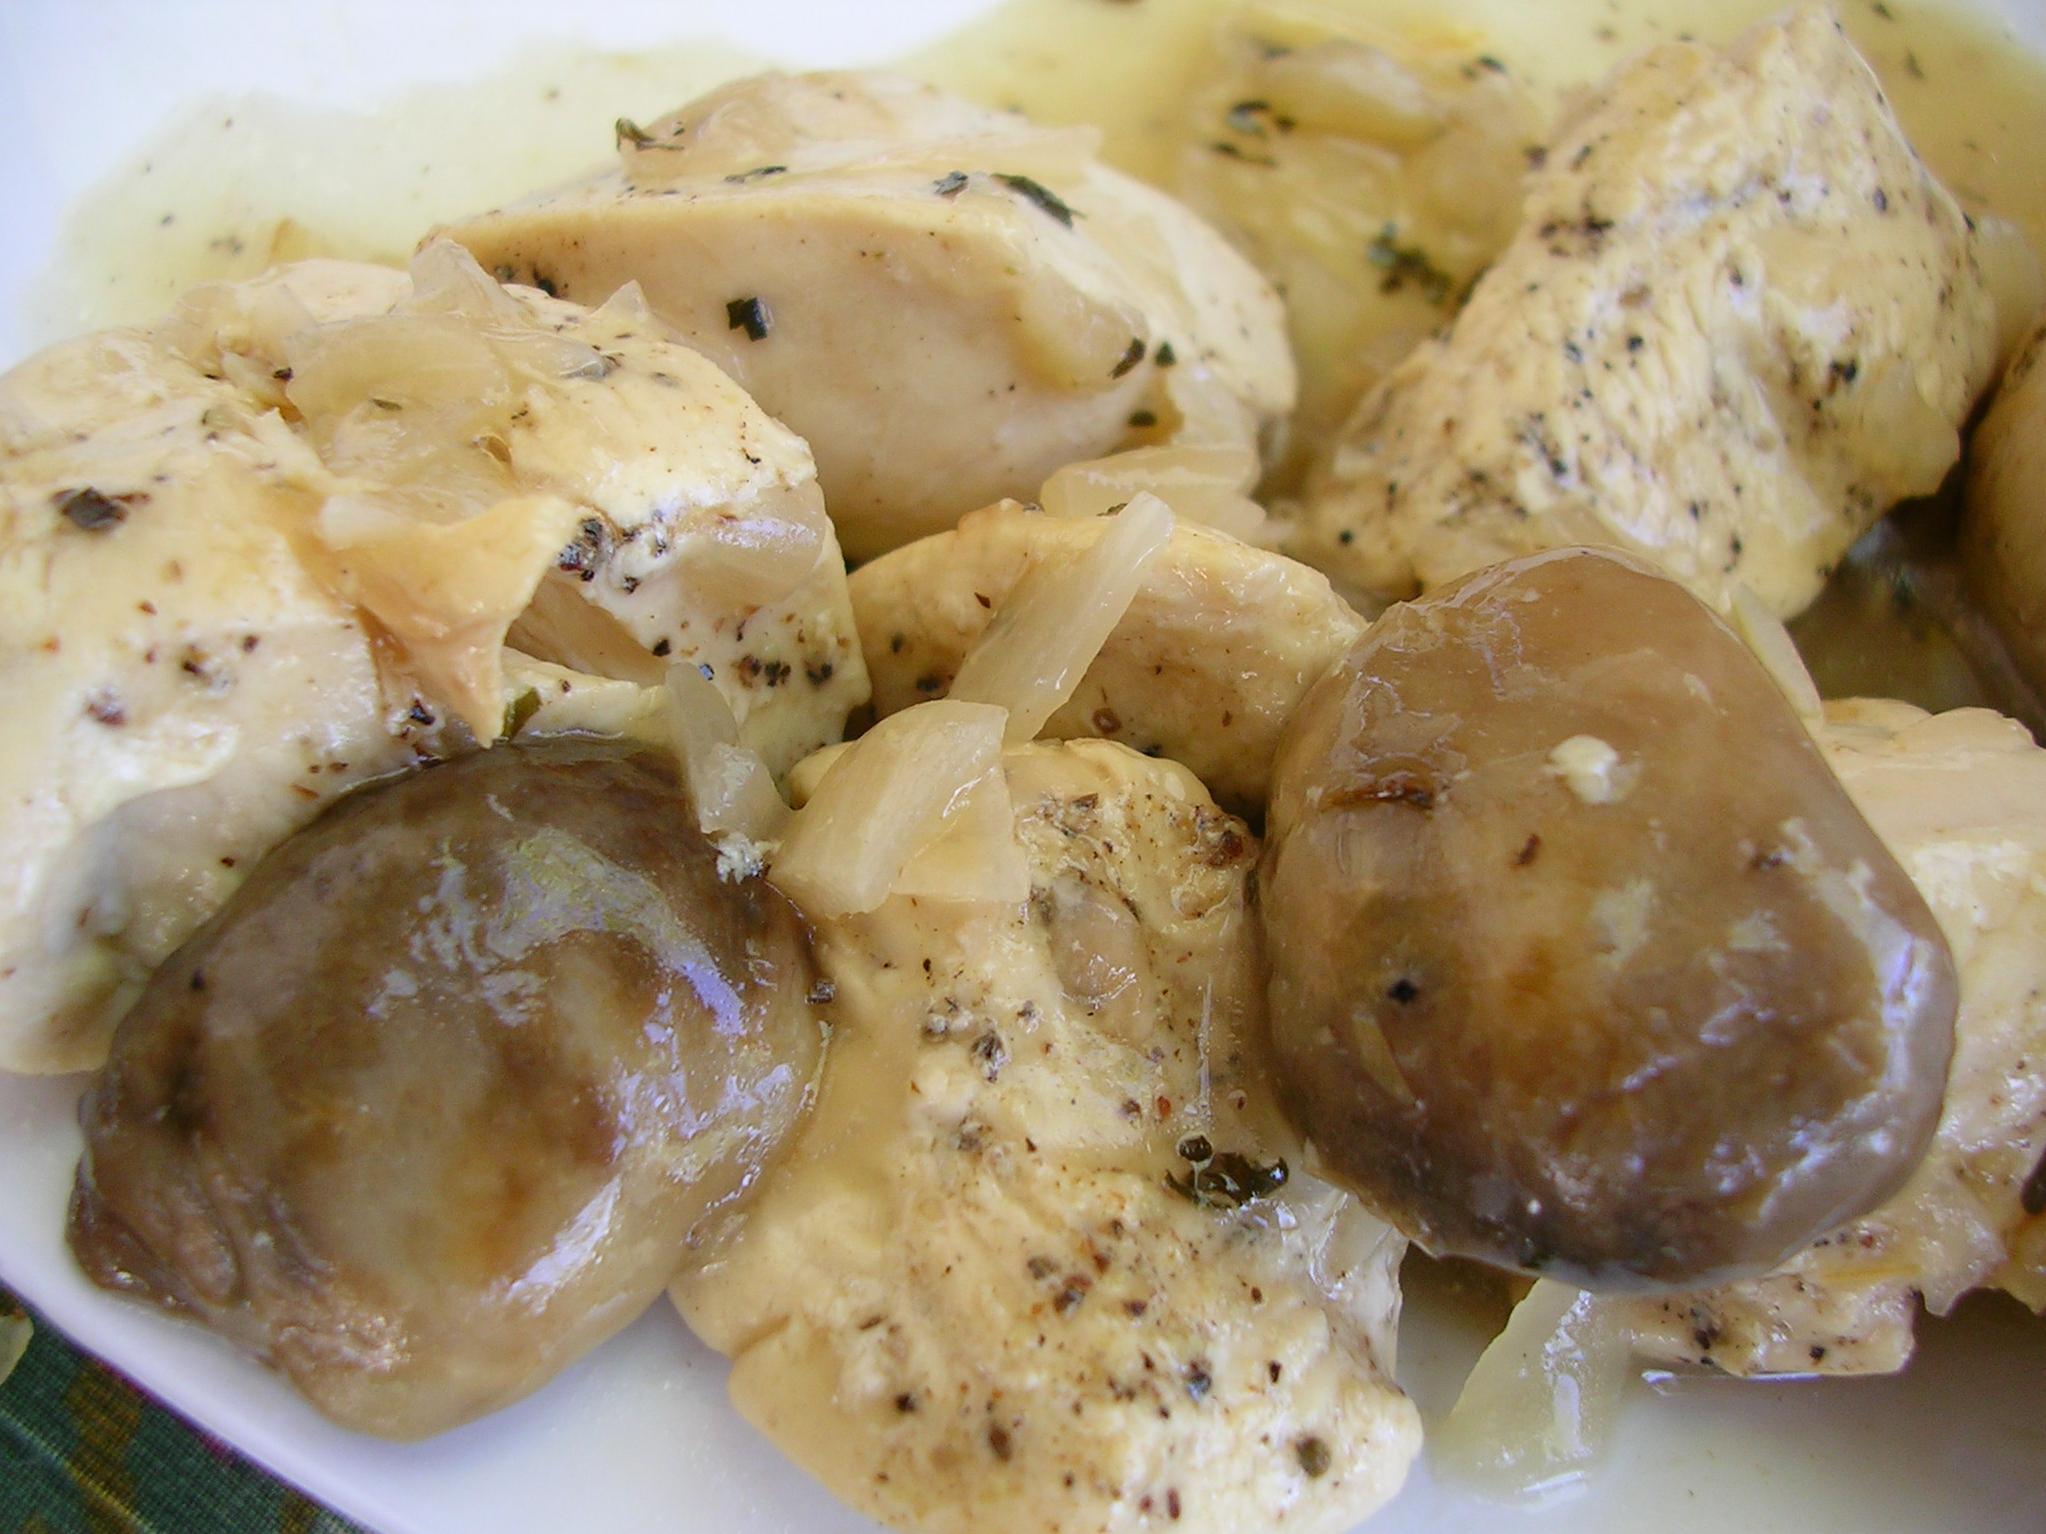  The rich and earthy flavors of the mushrooms perfectly complement the peppery chicken.